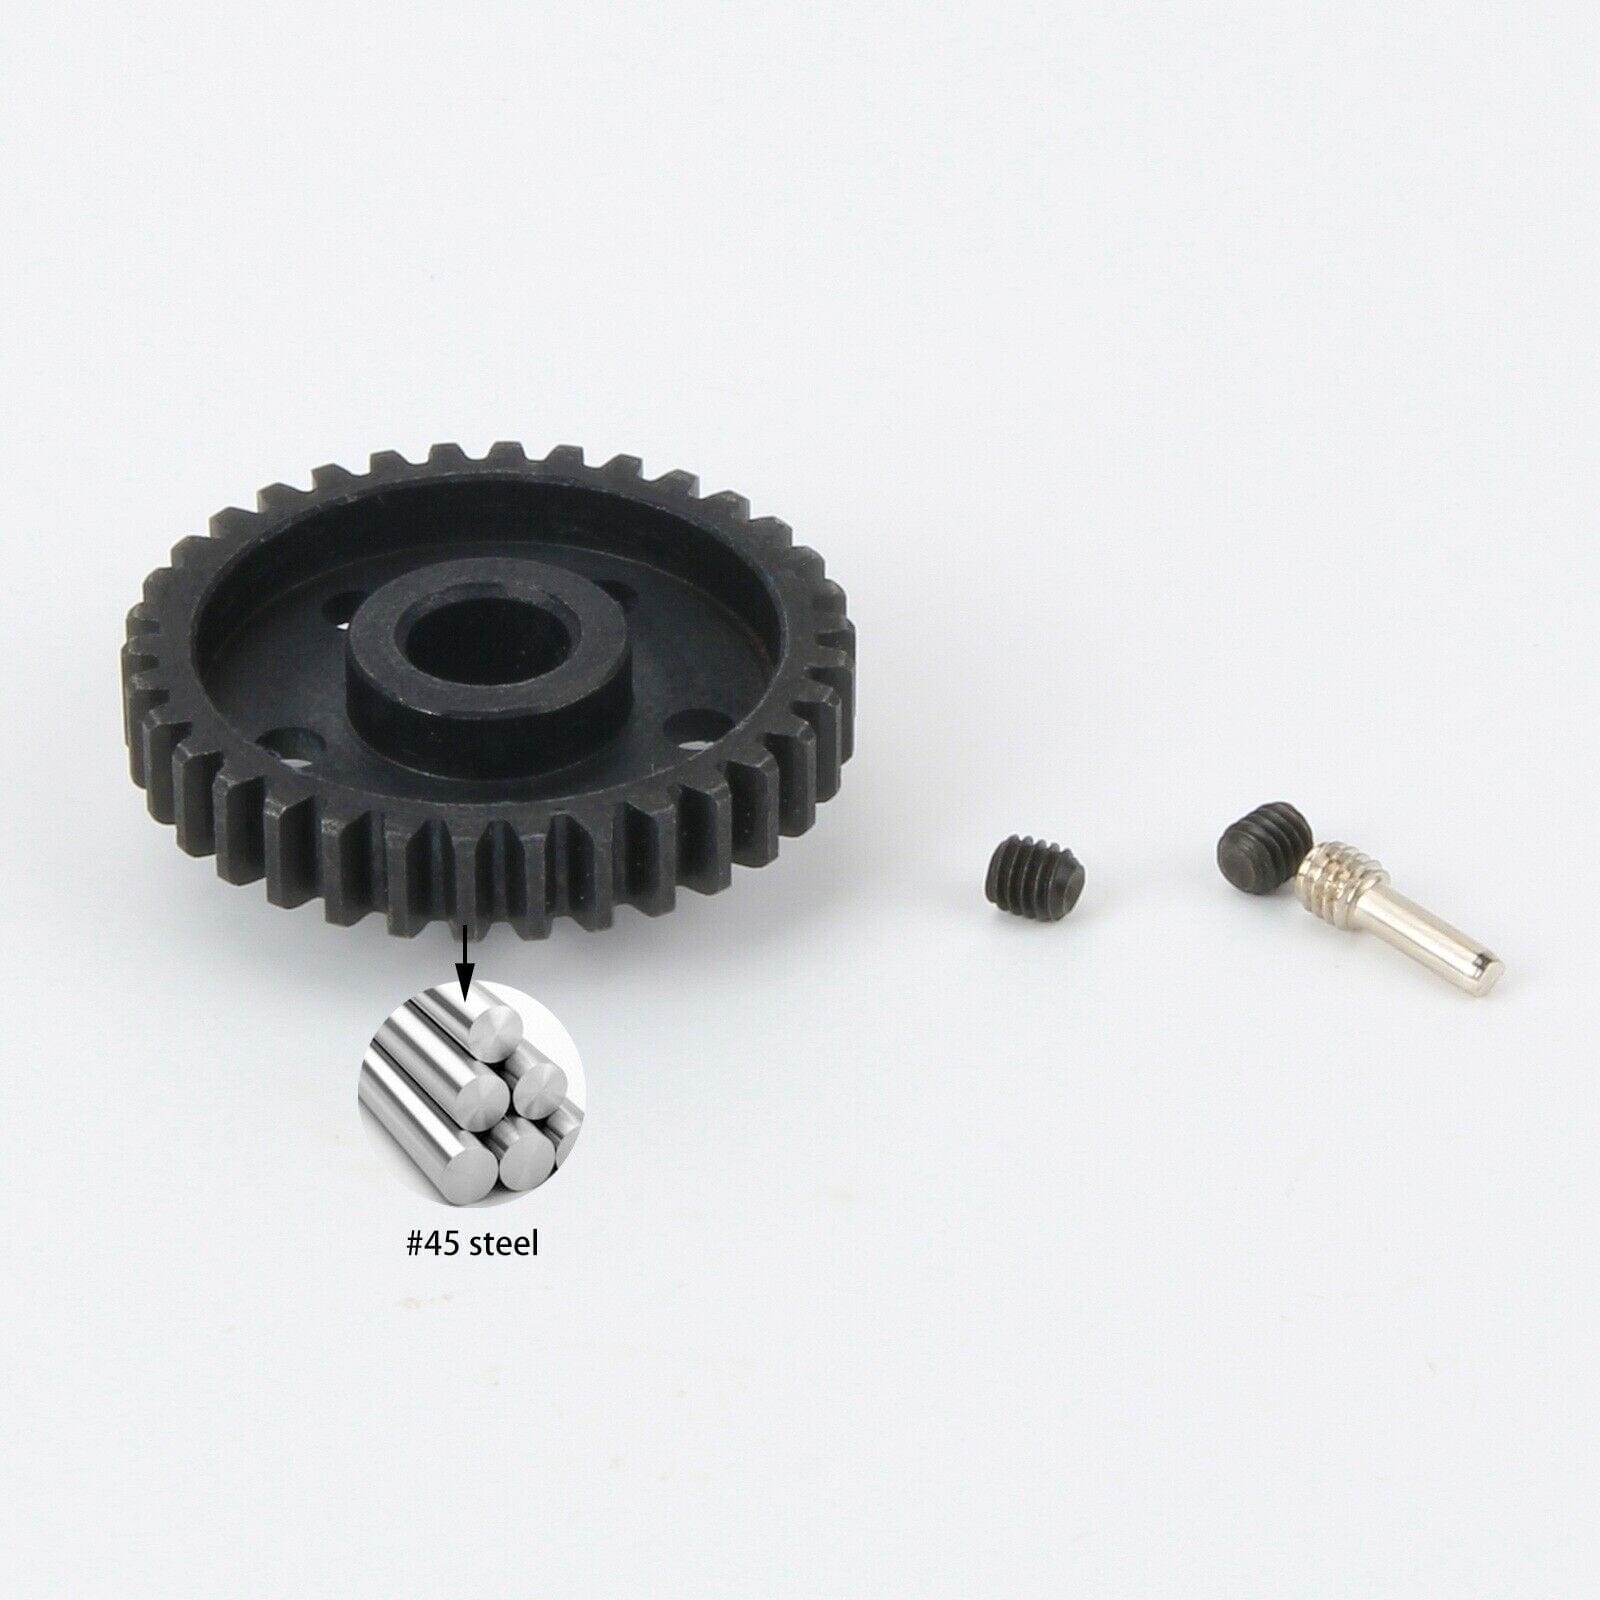 RCAWD ARRMA UPGRADE PARTS RCAWD ARA310944 34T MOD1 spool gear for arrma felony infraction limitless  6S BLX